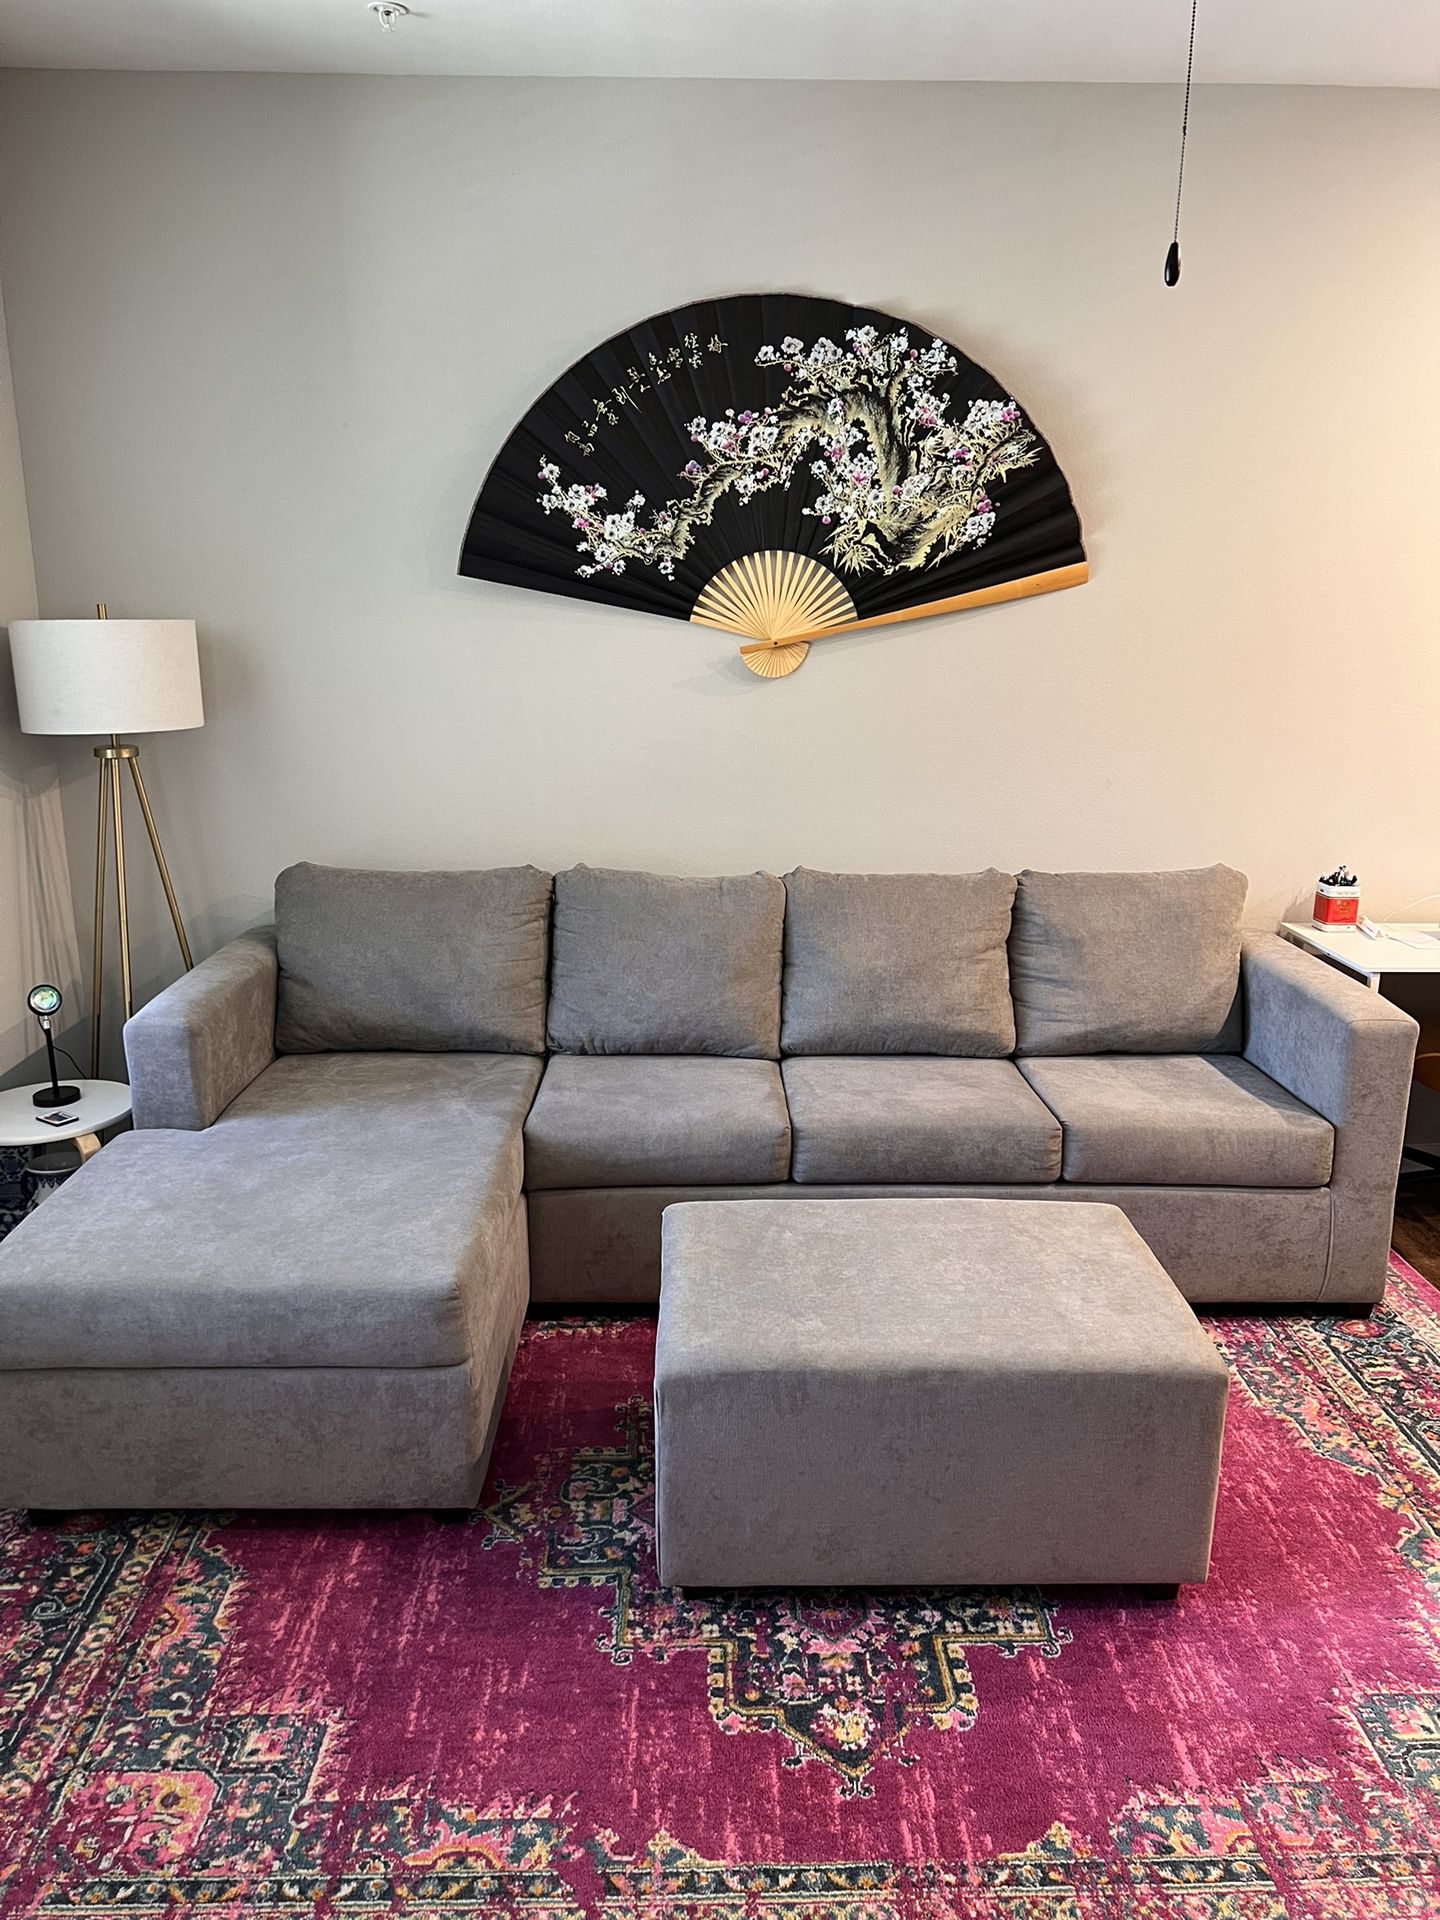 Sectional Sofa With Ottoman - Light Grey - Like New Condition!